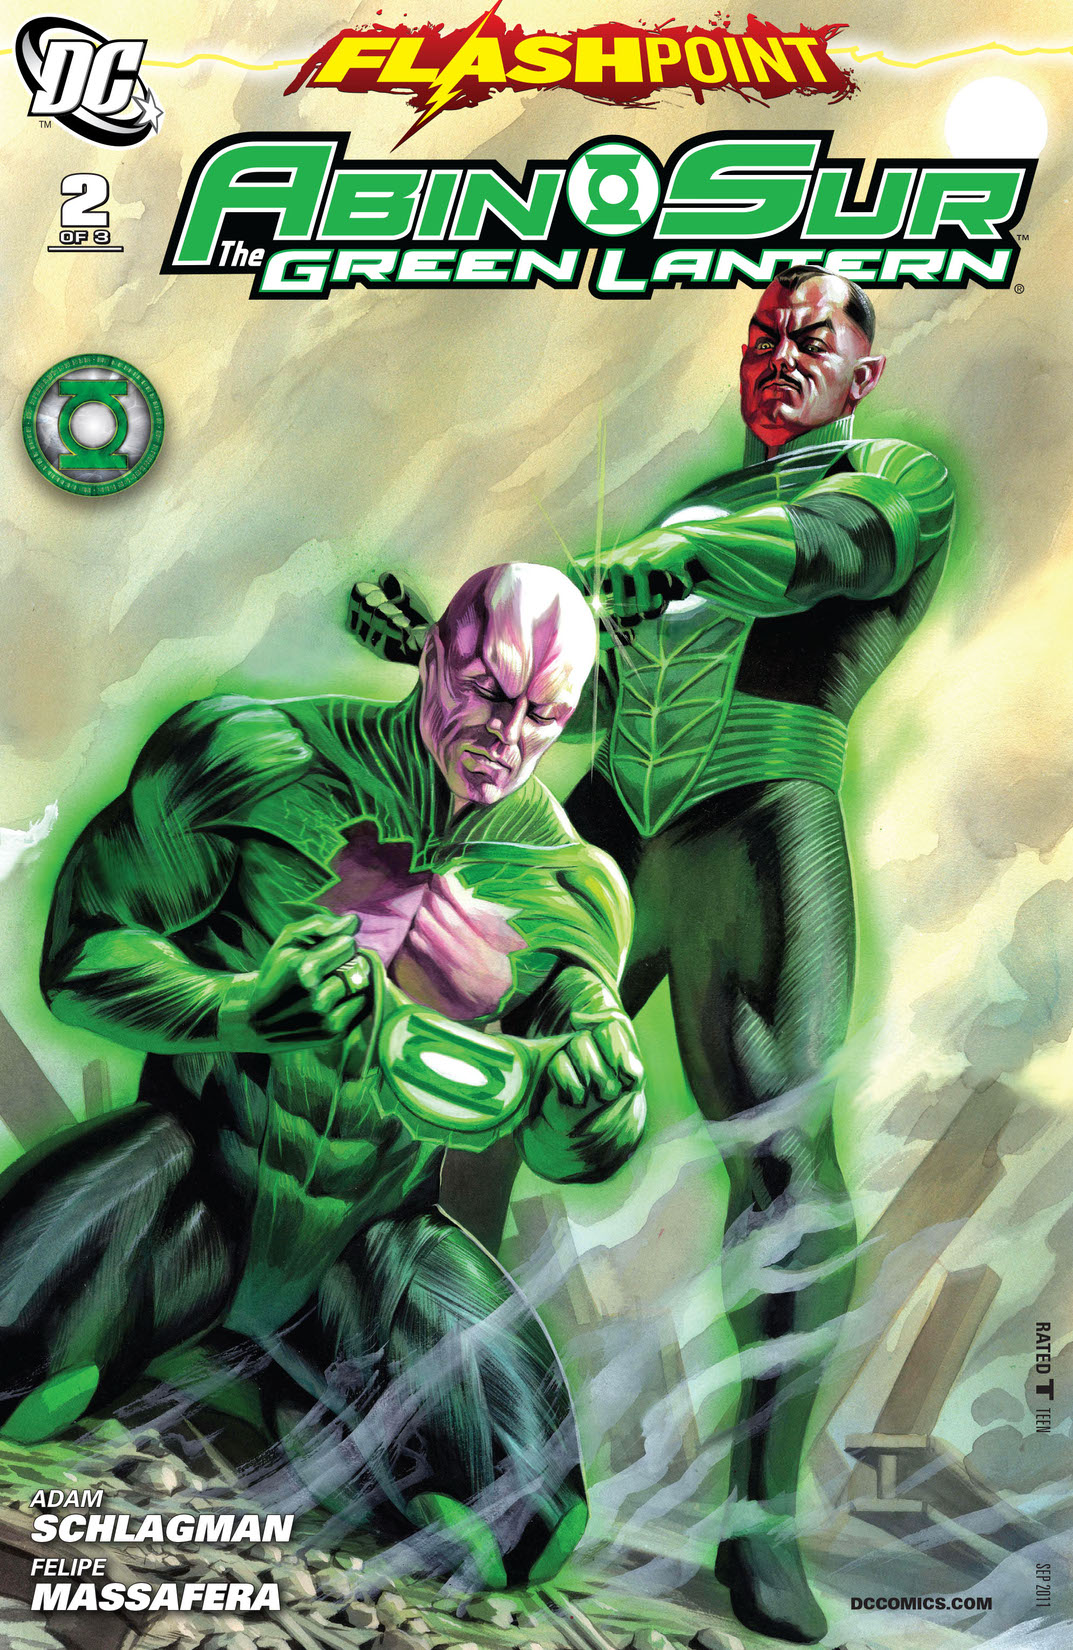 Flashpoint: Abin Sur the Green Lantern #2 preview images